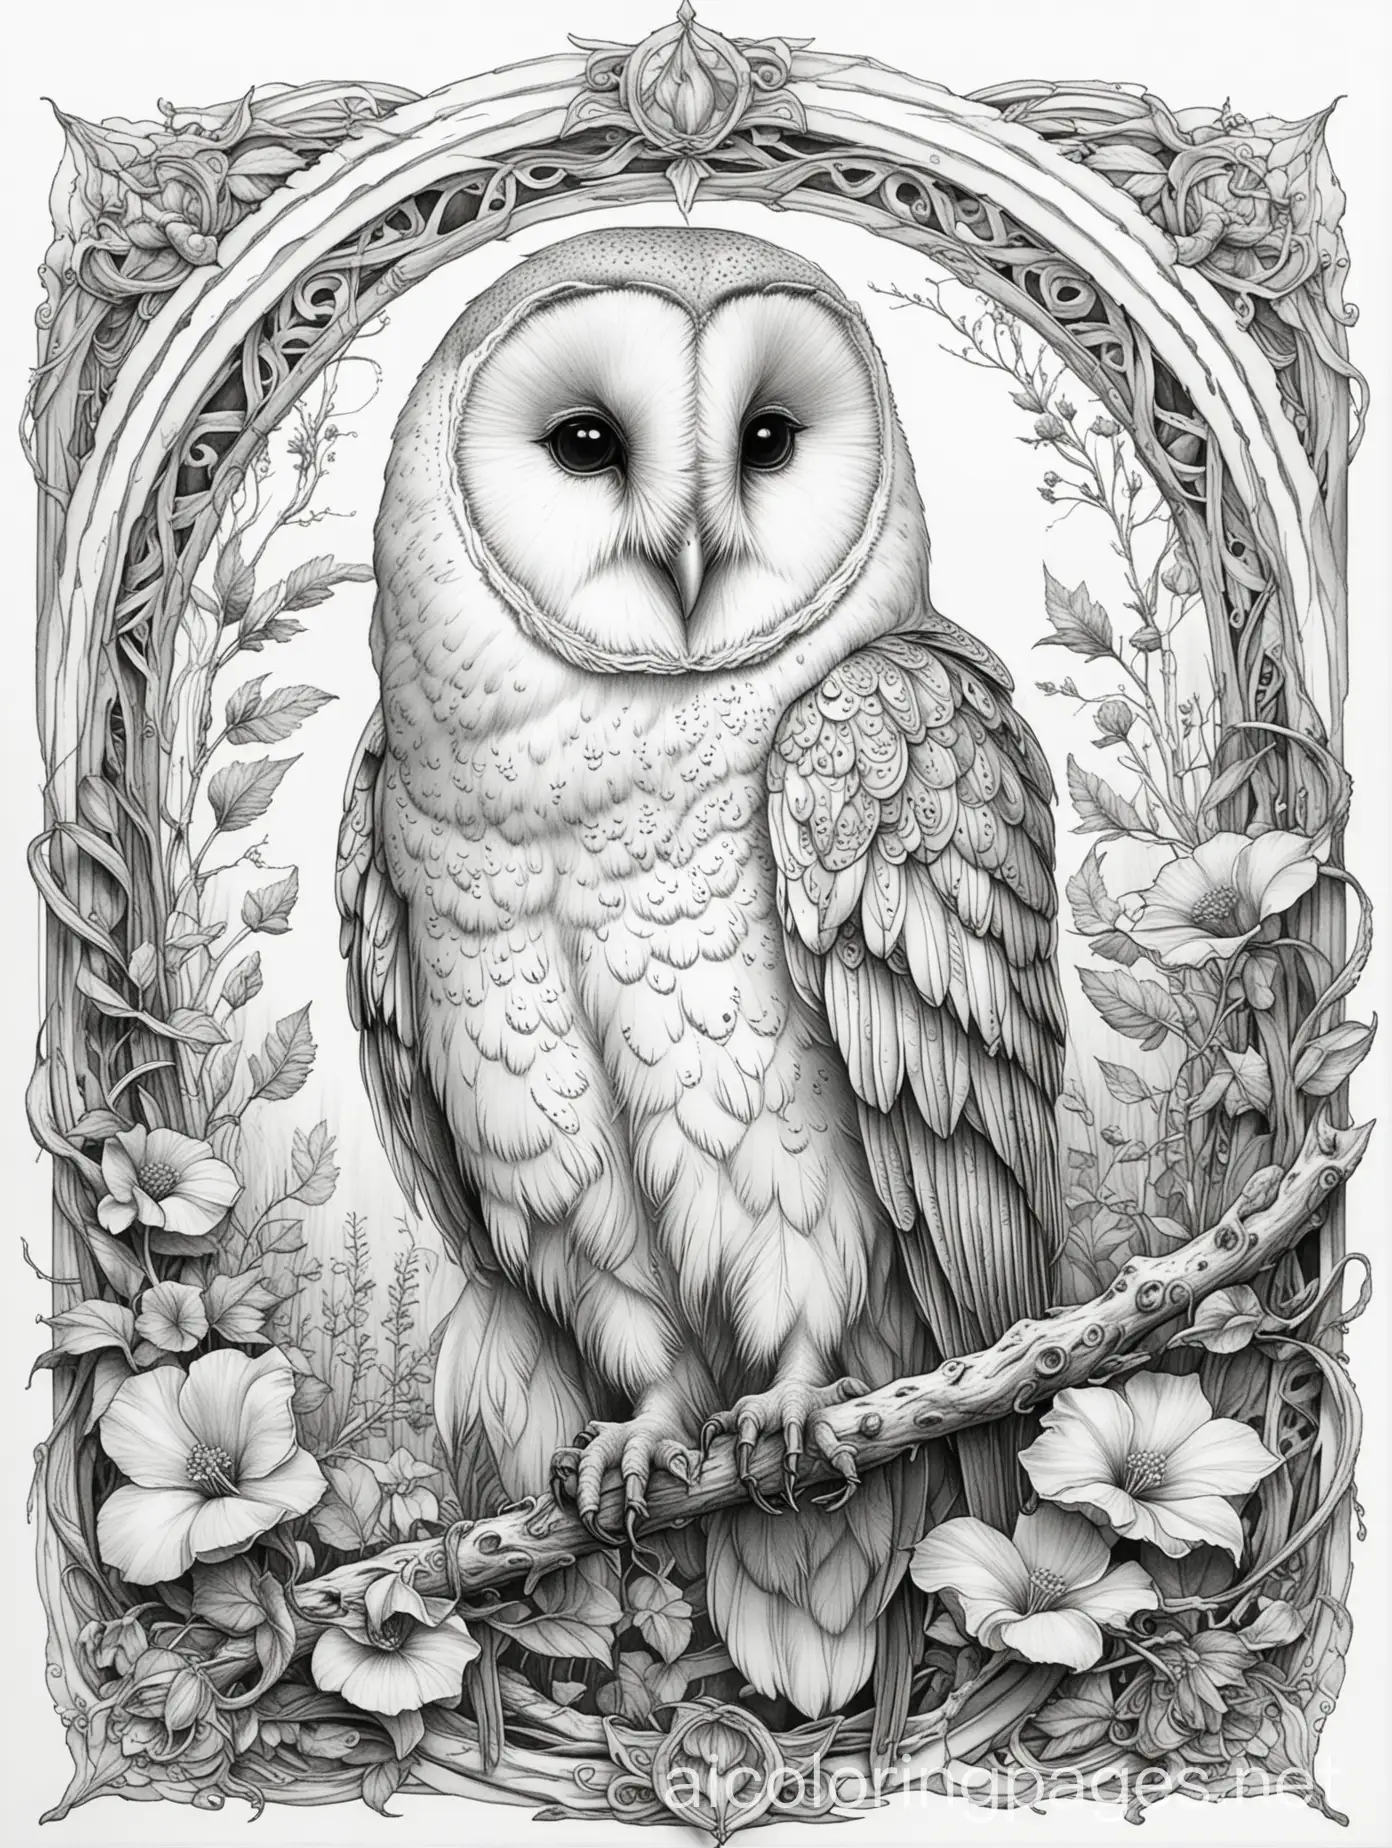 barn owl,   fantasy, ethereal, beautiful, Art nouveau, in the style of Brian Froud, Coloring Page, black and white, line art, white background, Simplicity, Ample White Space. The background of the coloring page is plain white to make it easy for young children to color within the lines. The outlines of all the subjects are easy to distinguish, making it simple for kids to color without too much difficulty